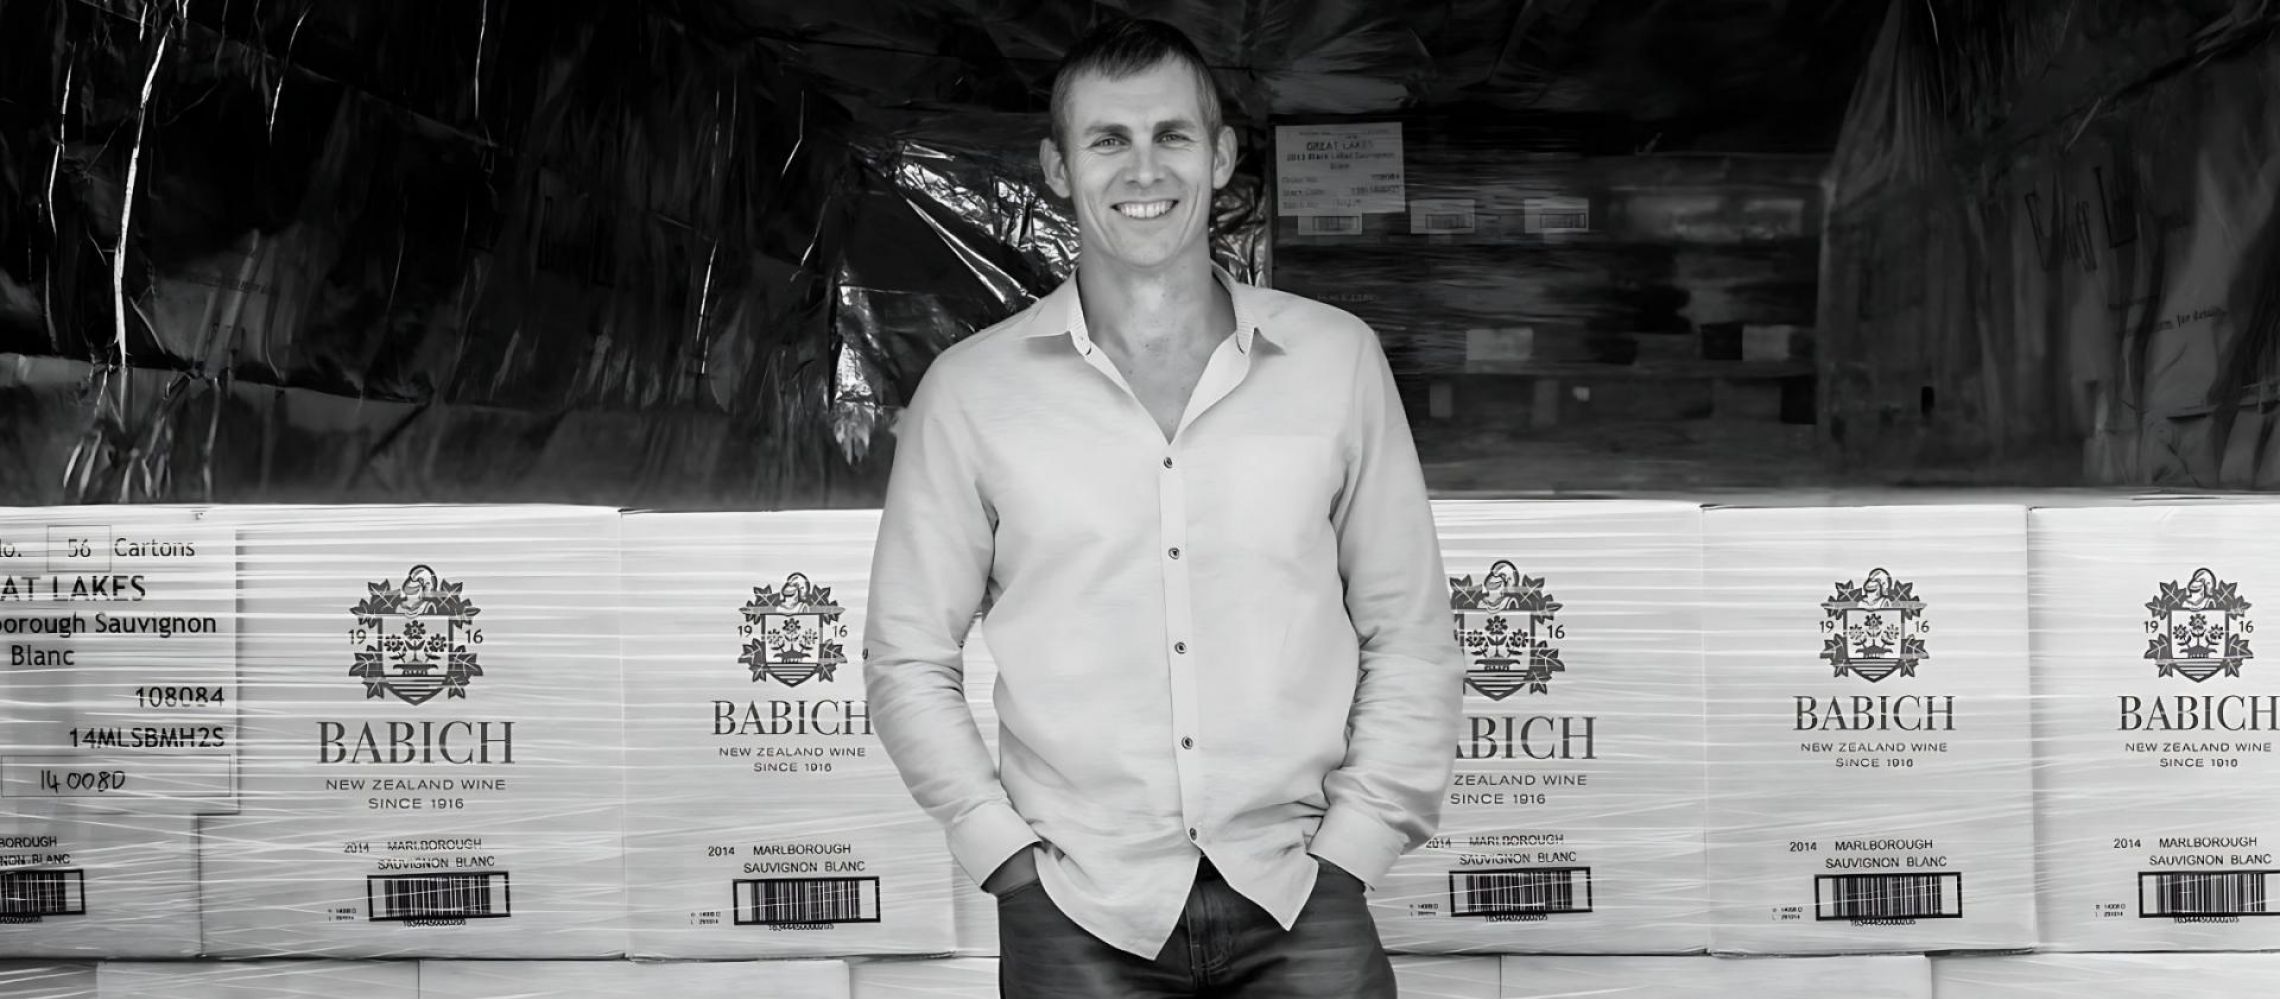 Photo for: A Century of Innovation in New Zealand: With David Babich of Babich Wines